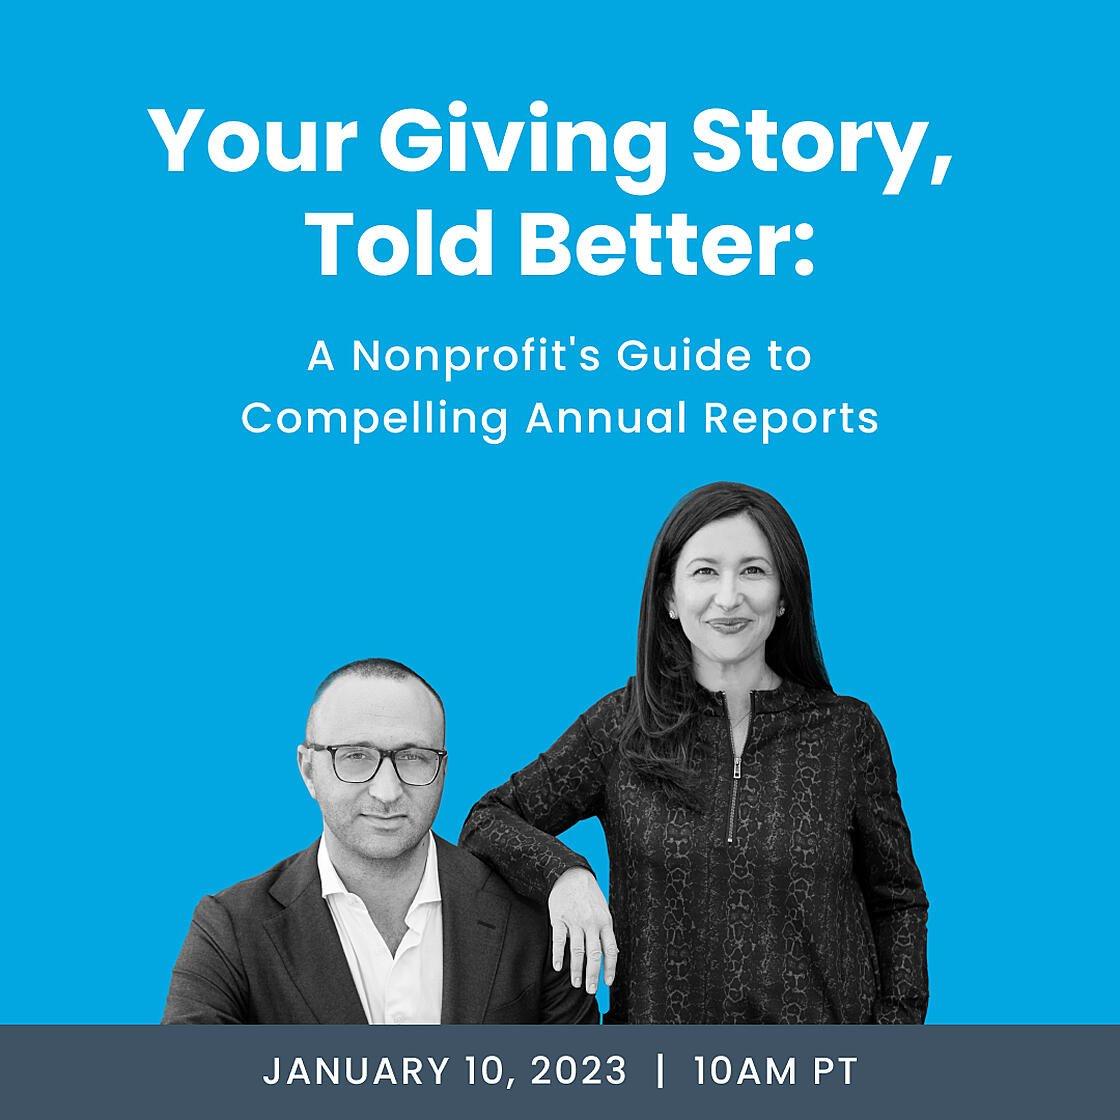 Your Giving Story, Told Better: A Nonprofit's Guide to Compelling Annual Reports